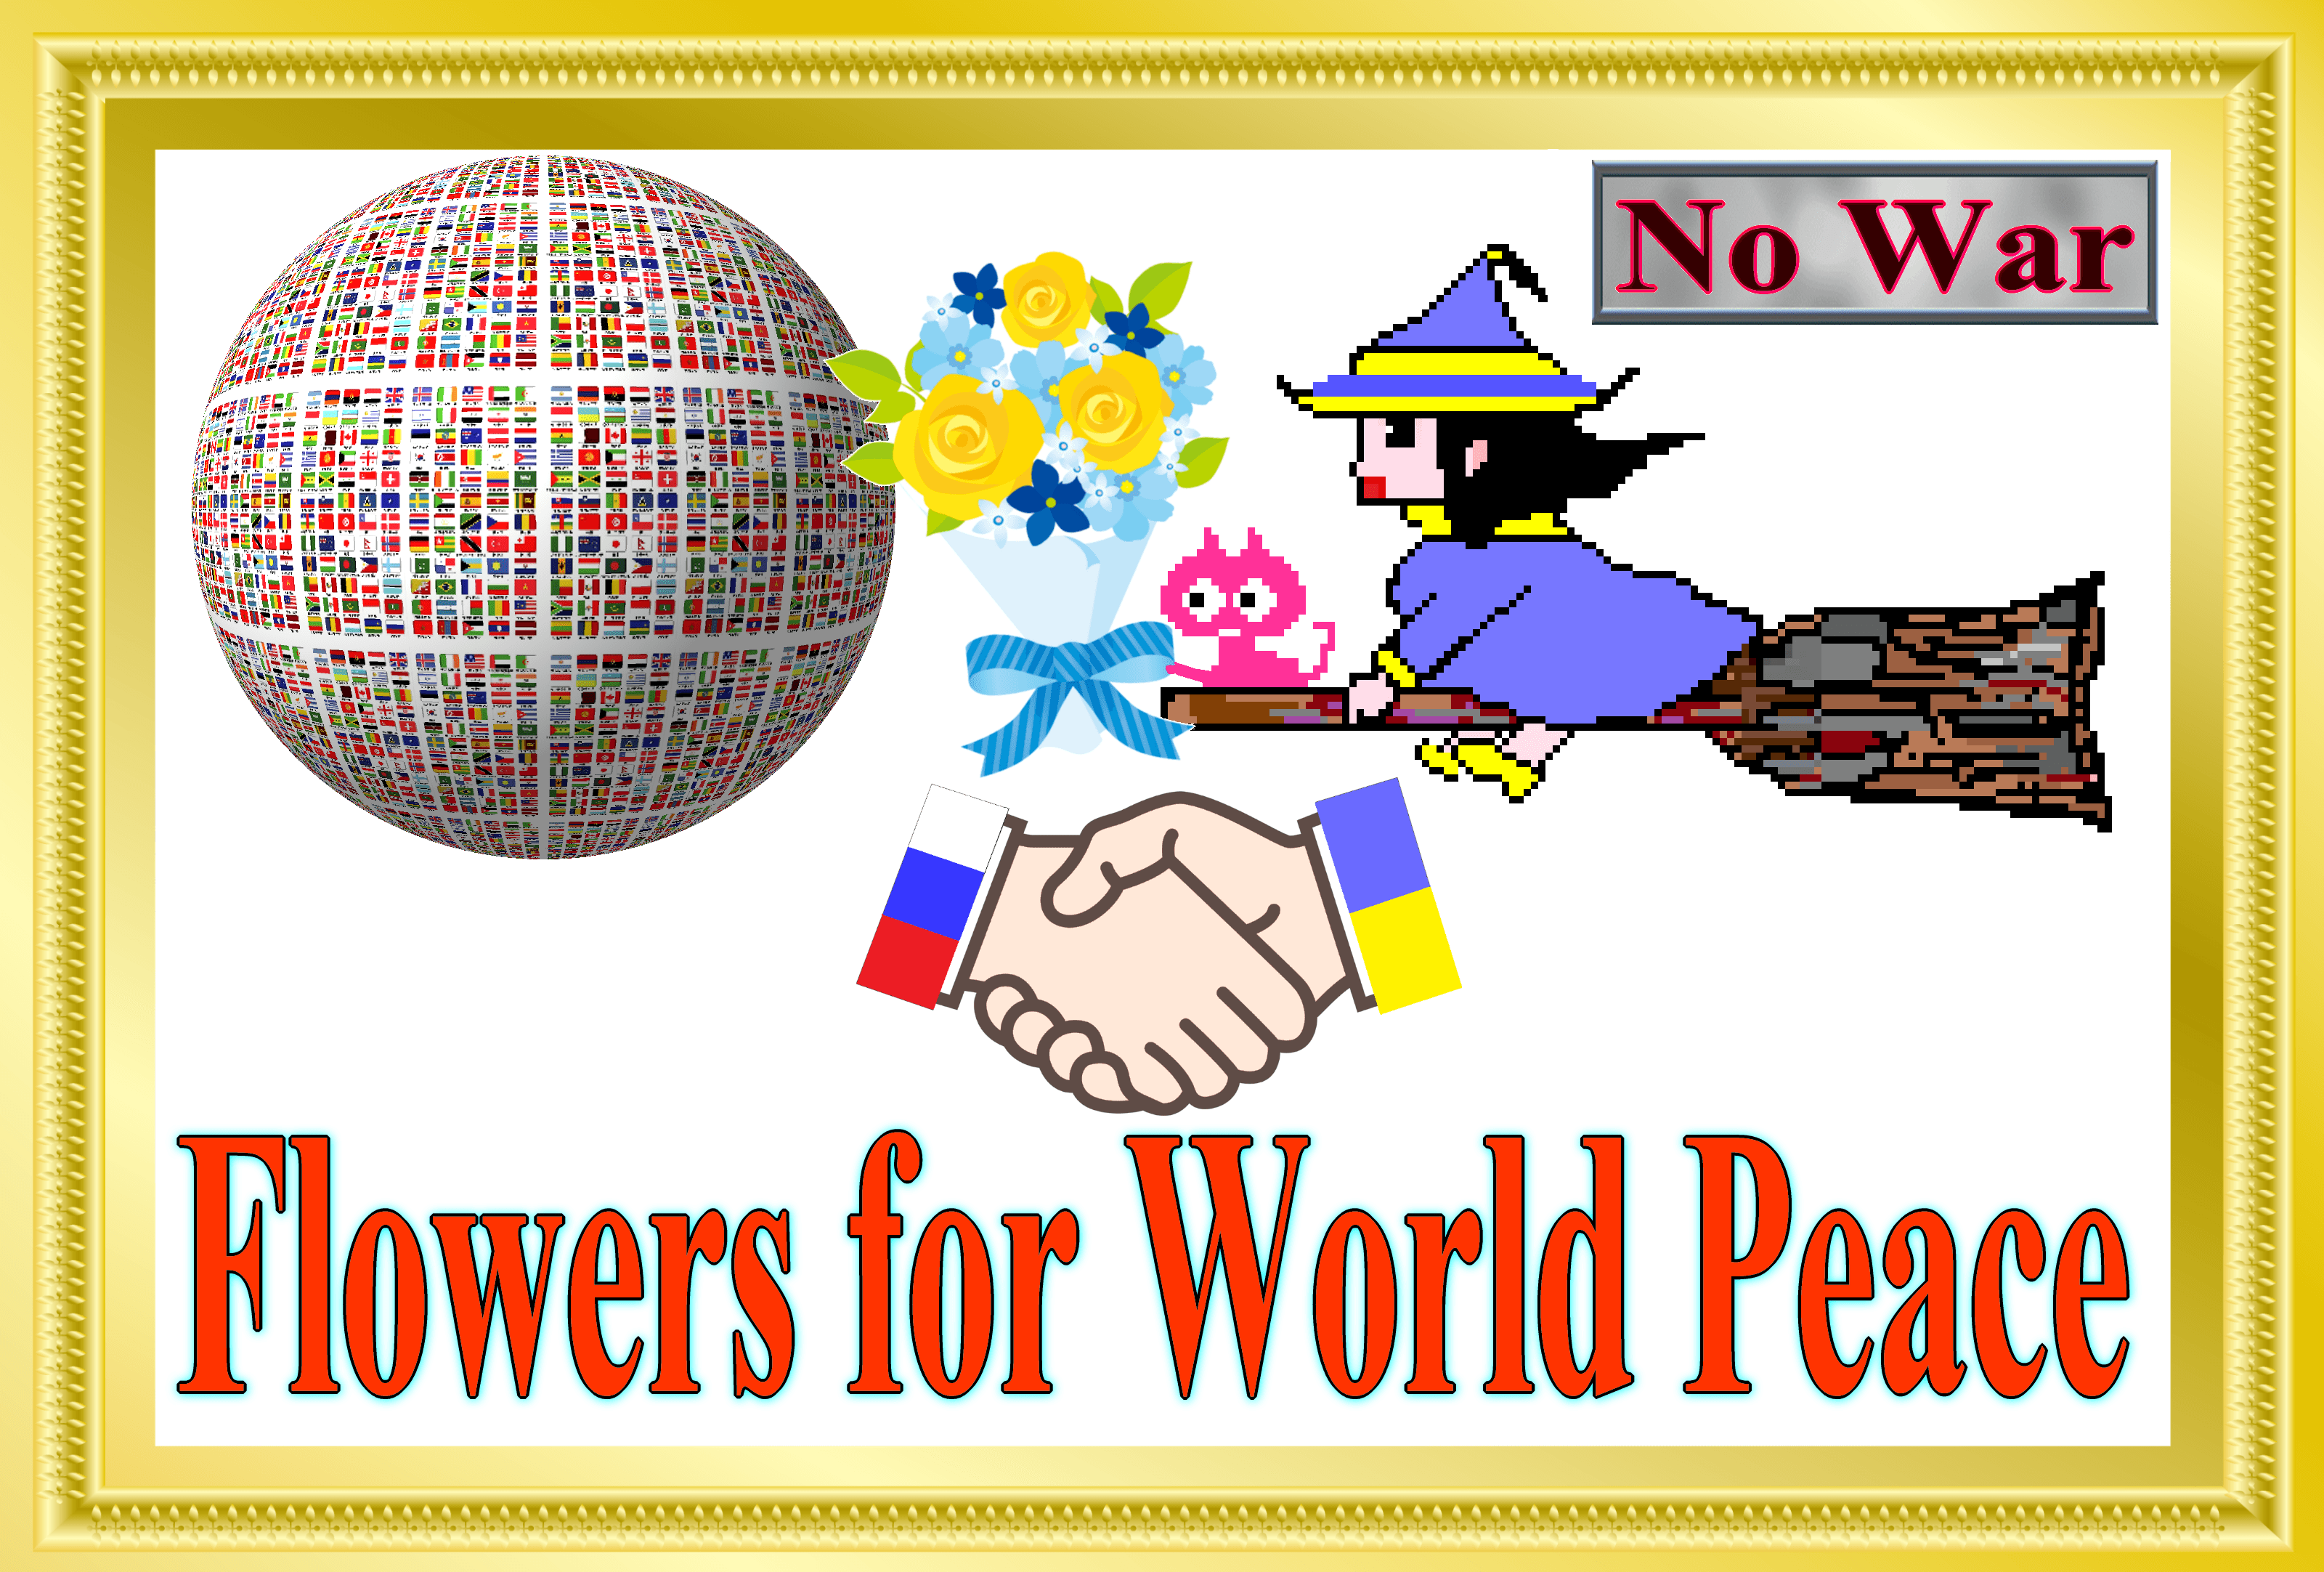 Flowers for World Peace